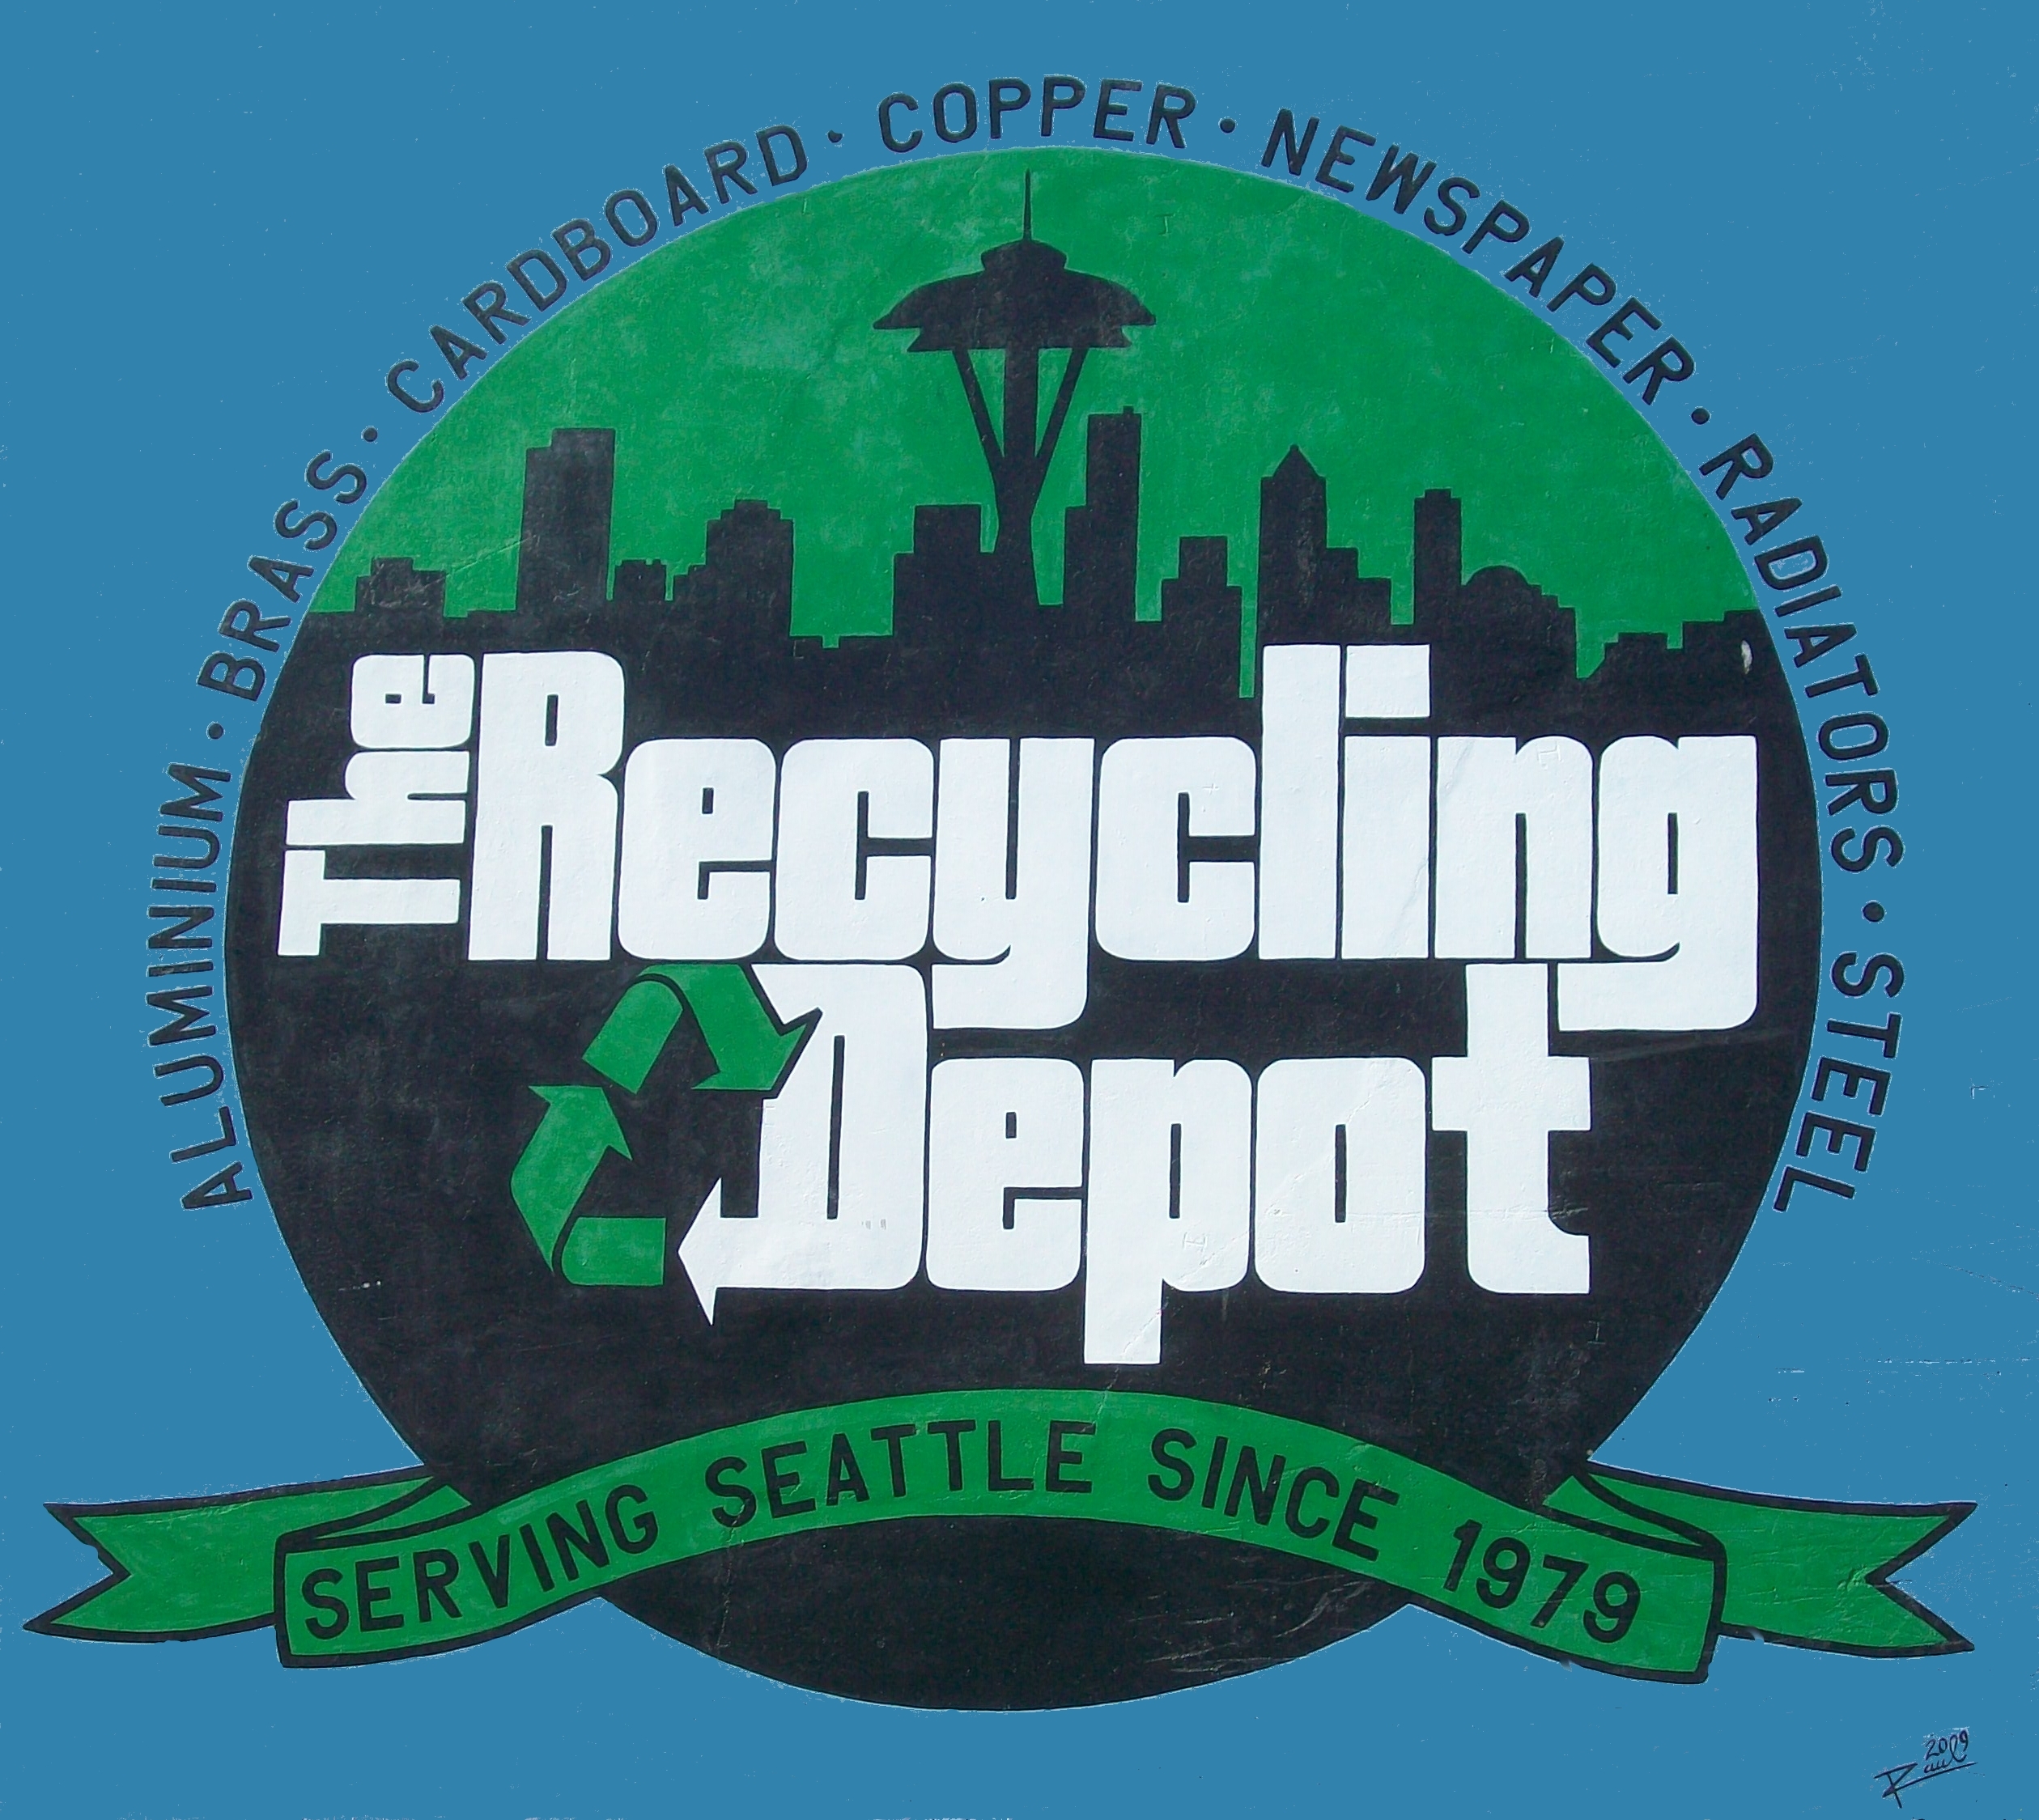 Recycling Depot Seattle - Recycling Center in Seattle